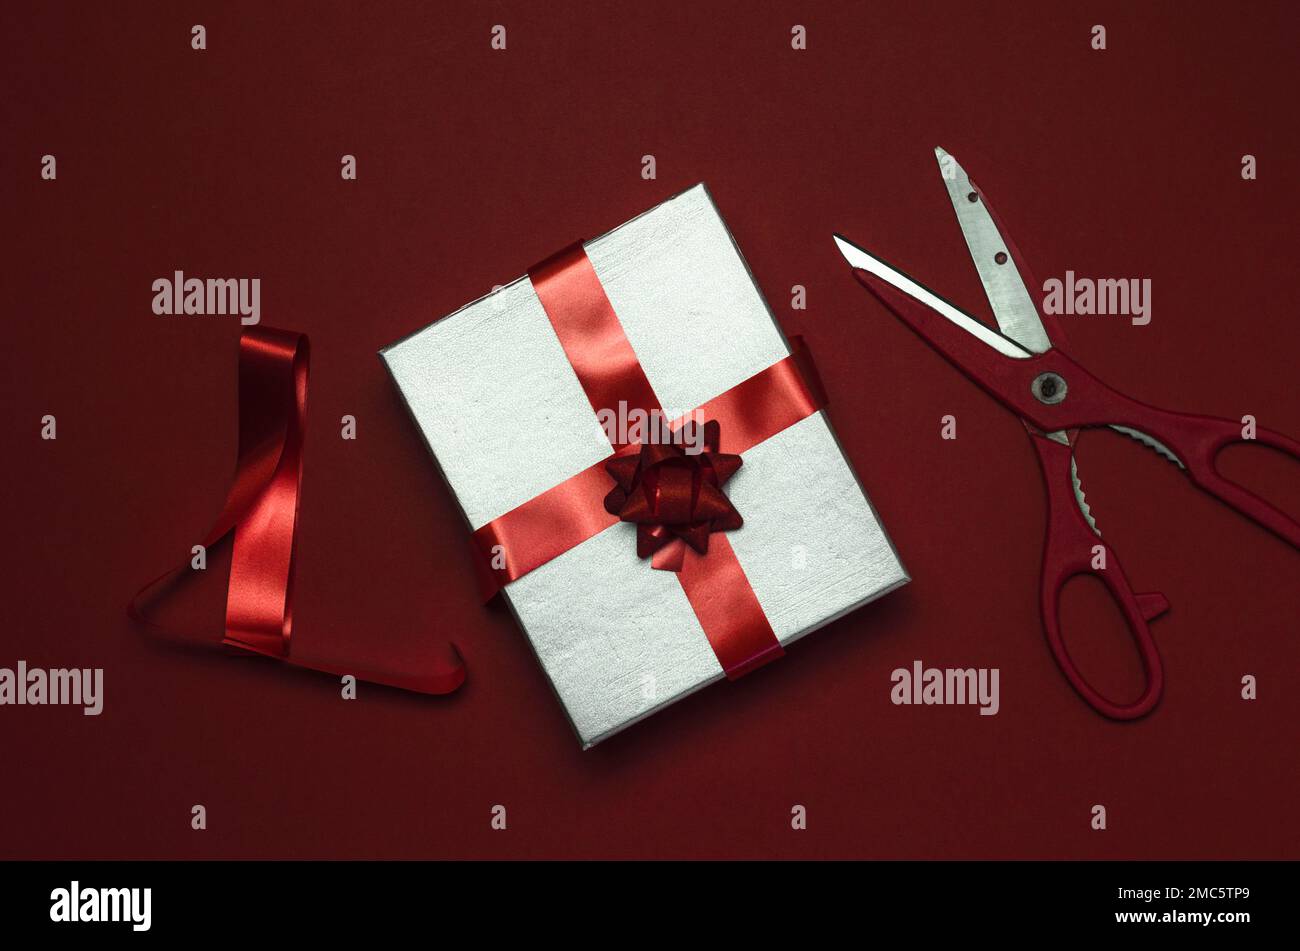 Gifts, Scissors & Wrapping Paper in Sunlight, Stock Image